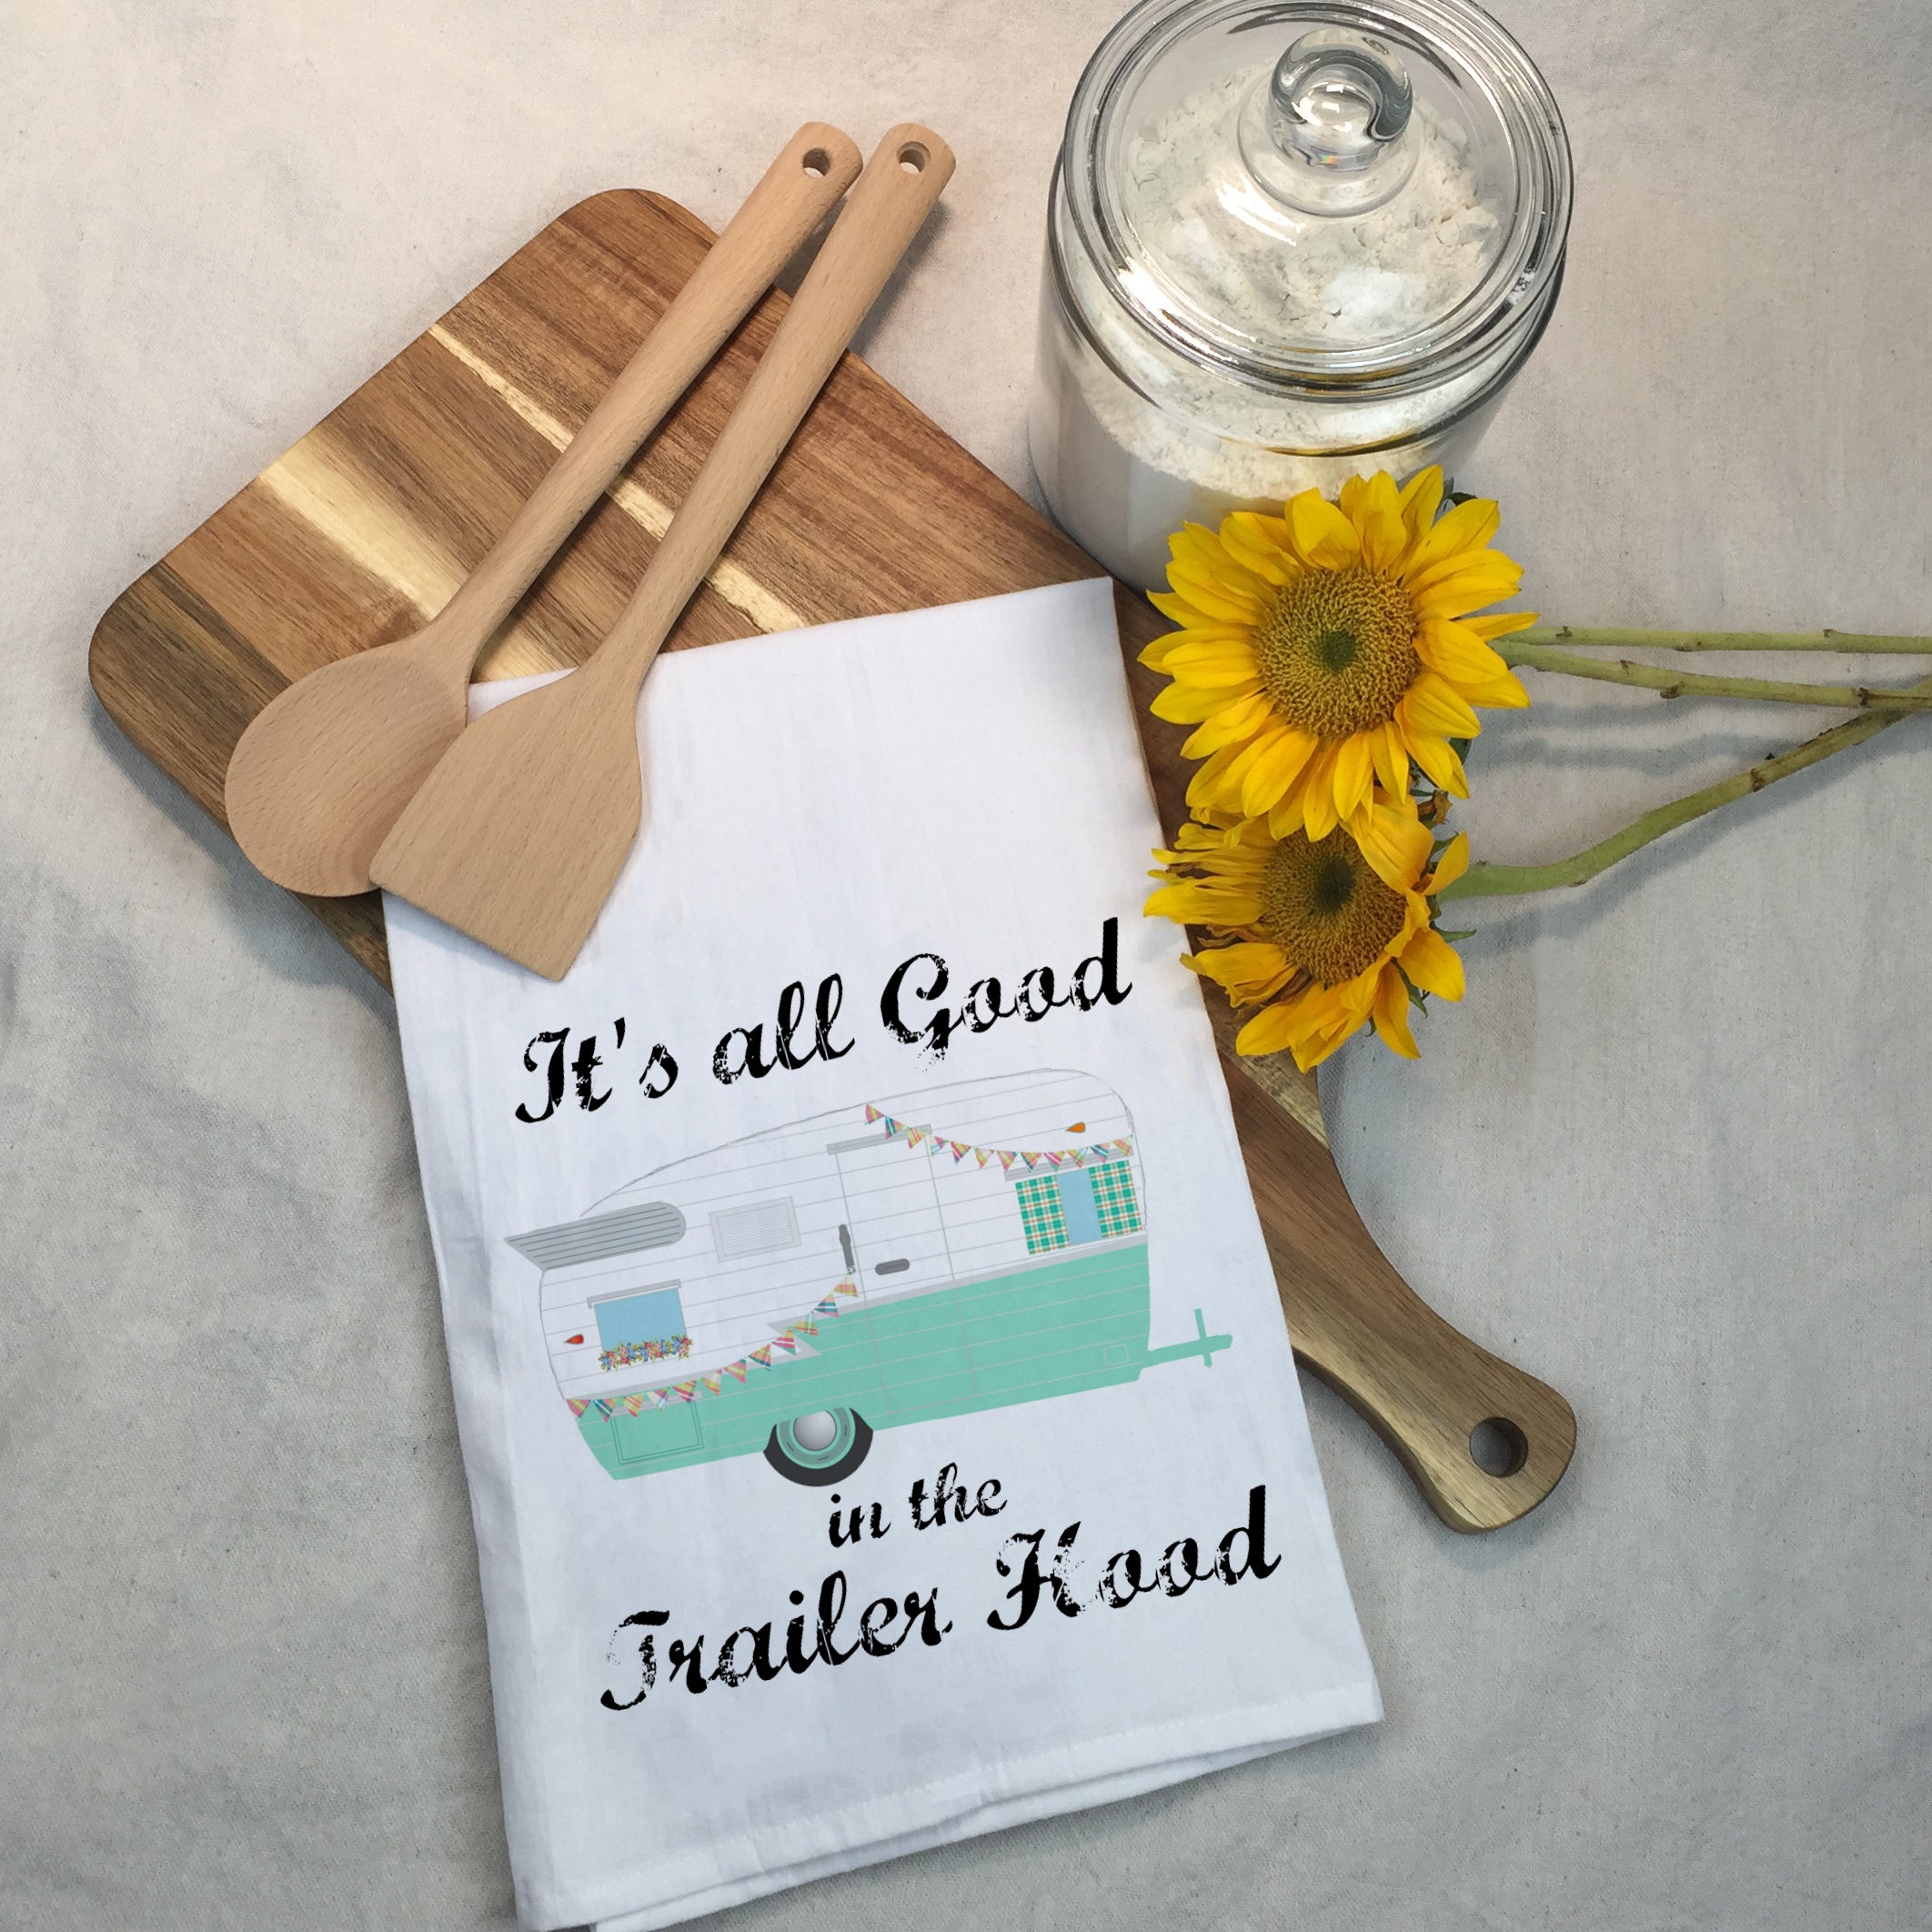 Twisted Wares It's All Good in The Trailer Hood Kitchen Towel